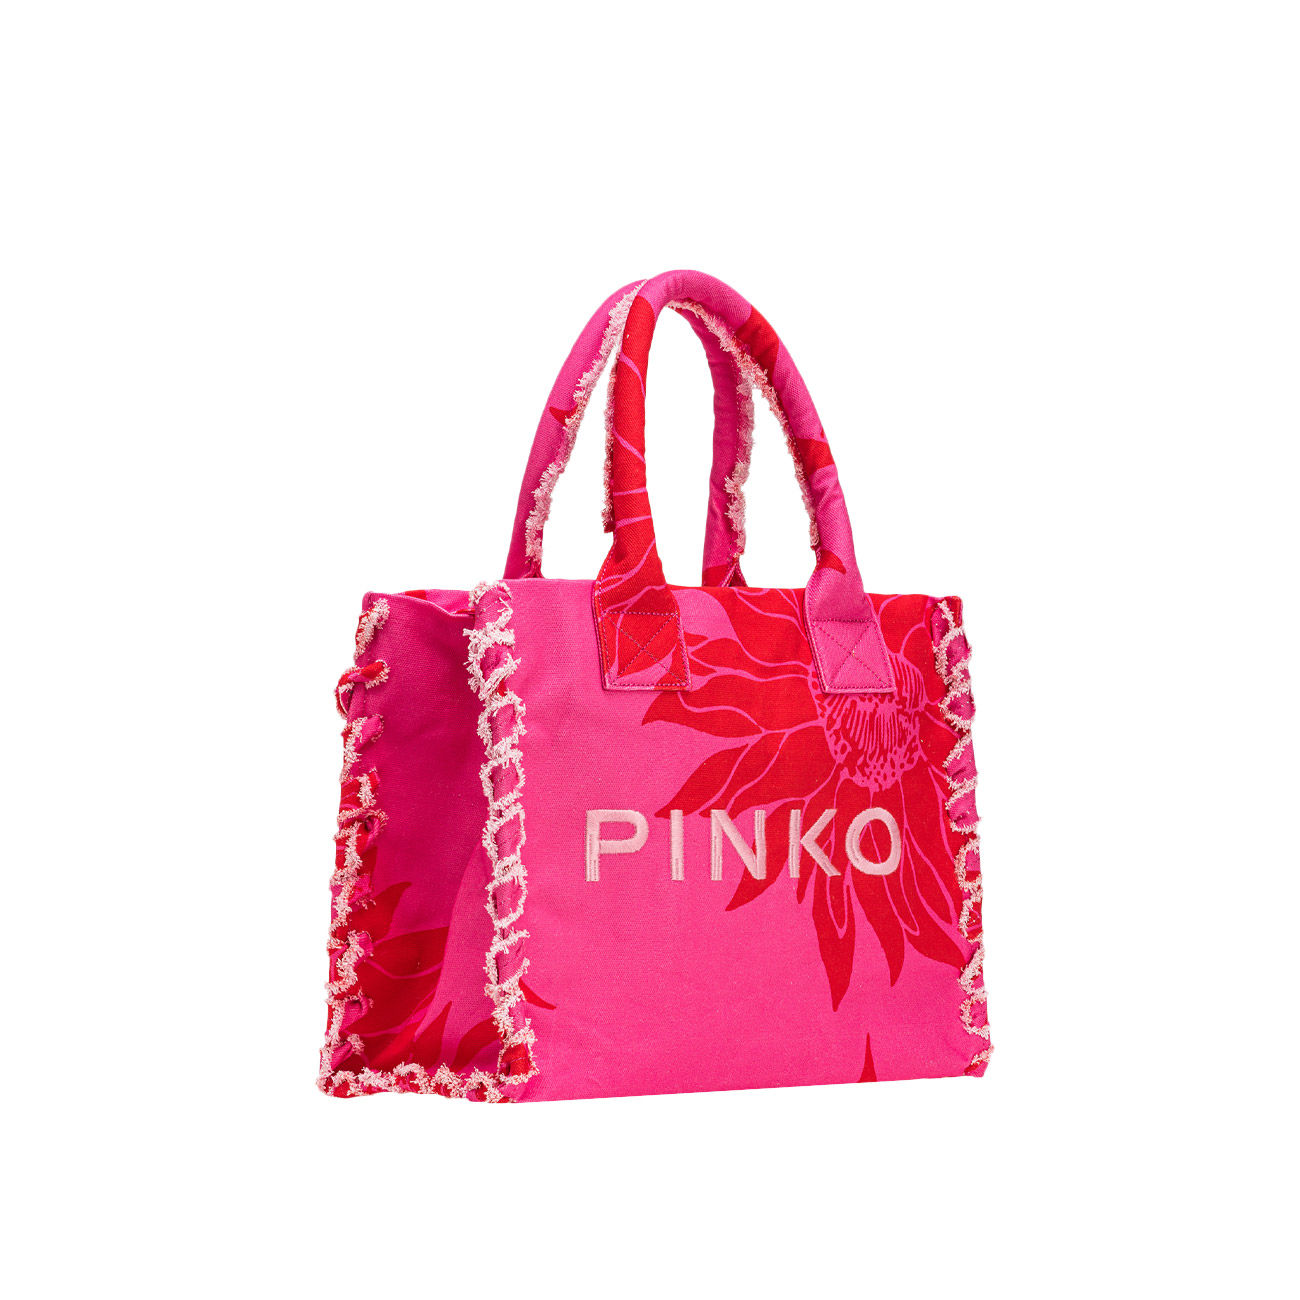 PINKO - MINI LOVE QUILTED PUFF LEATHER BAG WITH VERSITY PINS - Eleonora  Bonucci